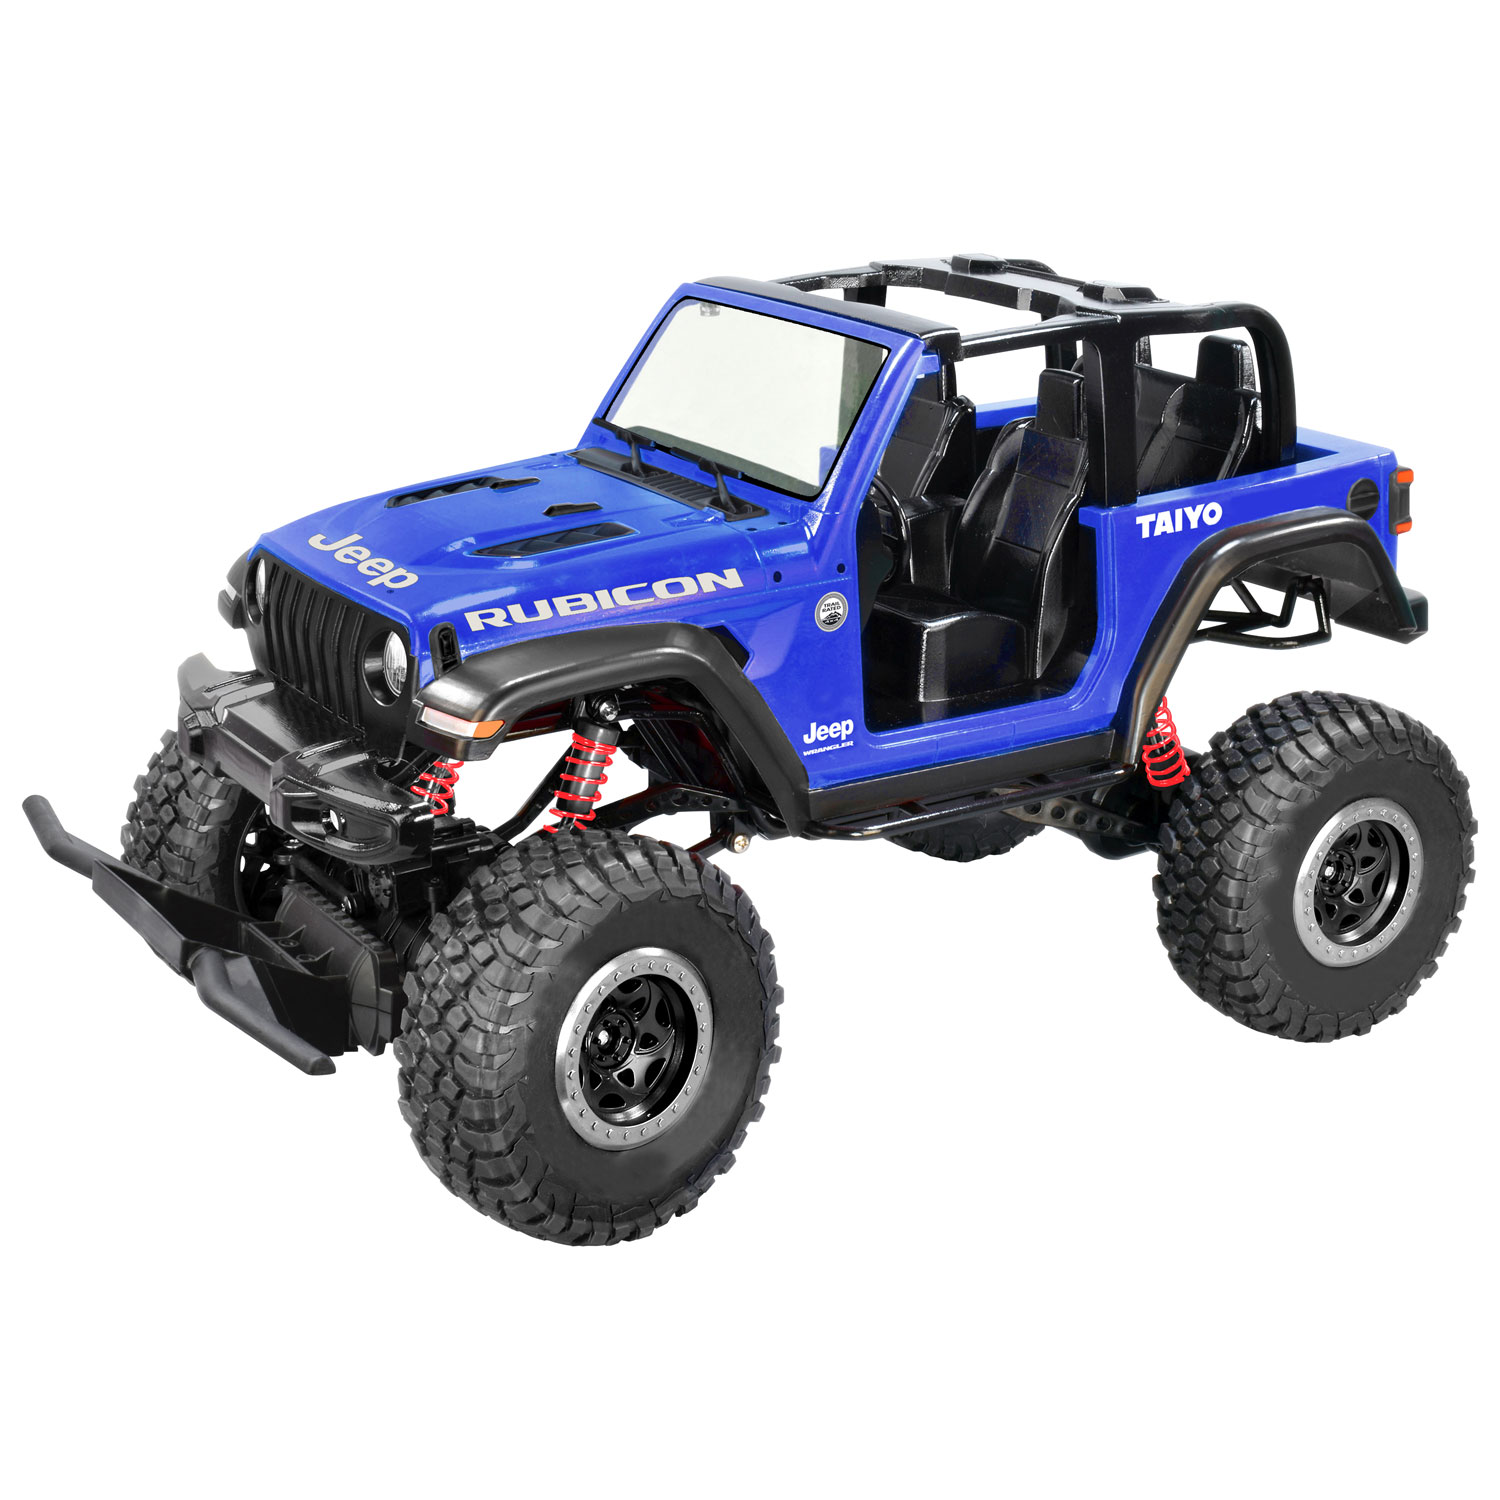 Taiyo Jeep Wrangler Rubicon 4WD 1/8 Scale RC Vehicle (080011B) - Blue -  Only at Best Buy | Best Buy Canada